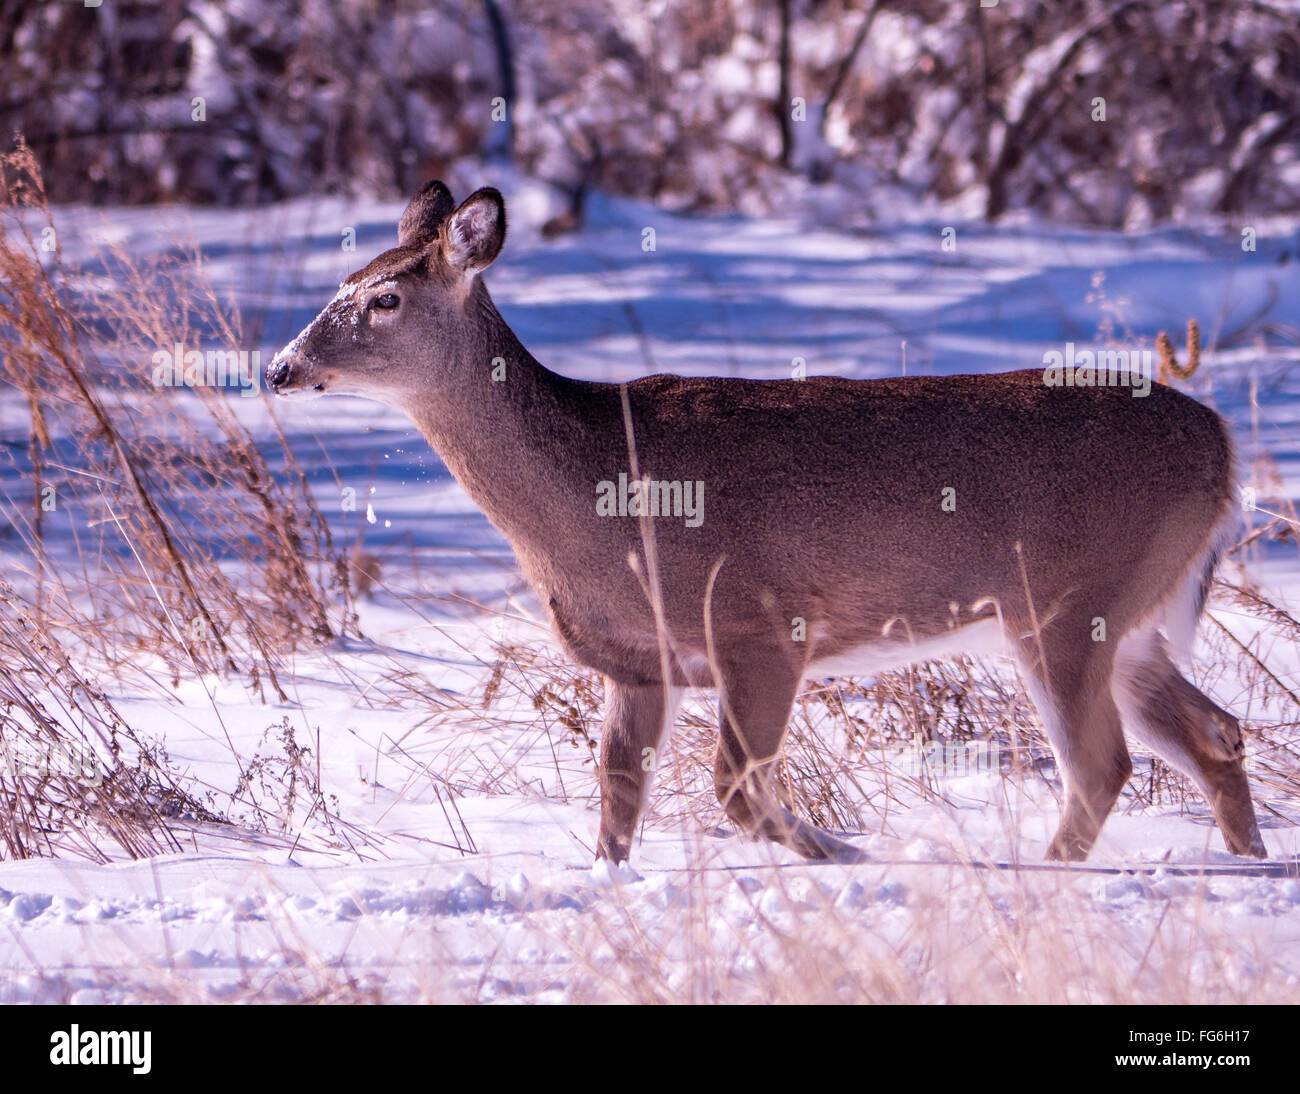 Whitetail doe with a dusting of snow on her face Stock Photo